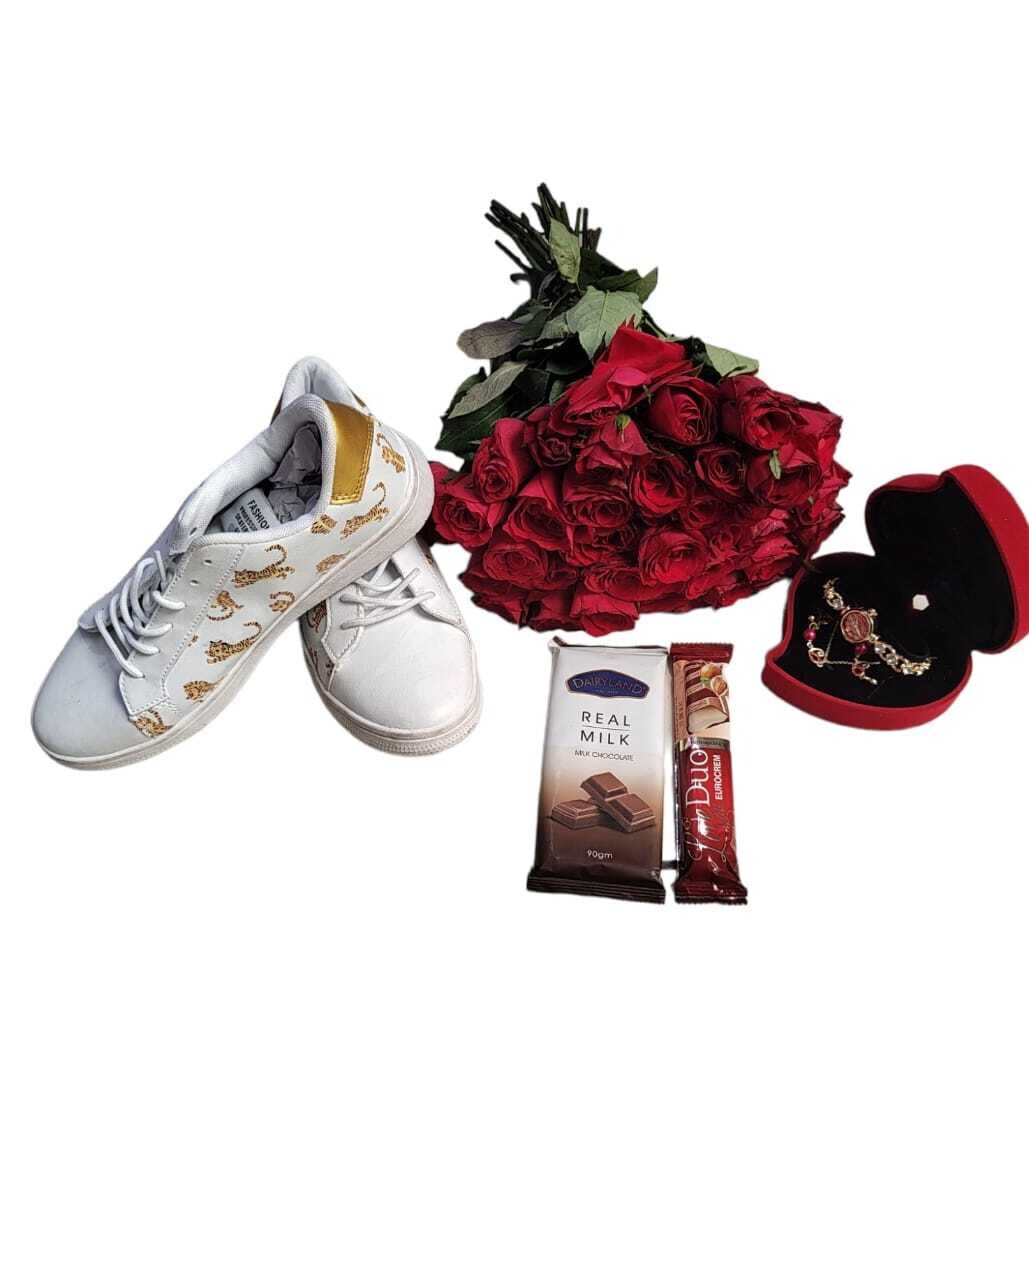 Best gift package flowers, chocolate, ladies gift set & shoes